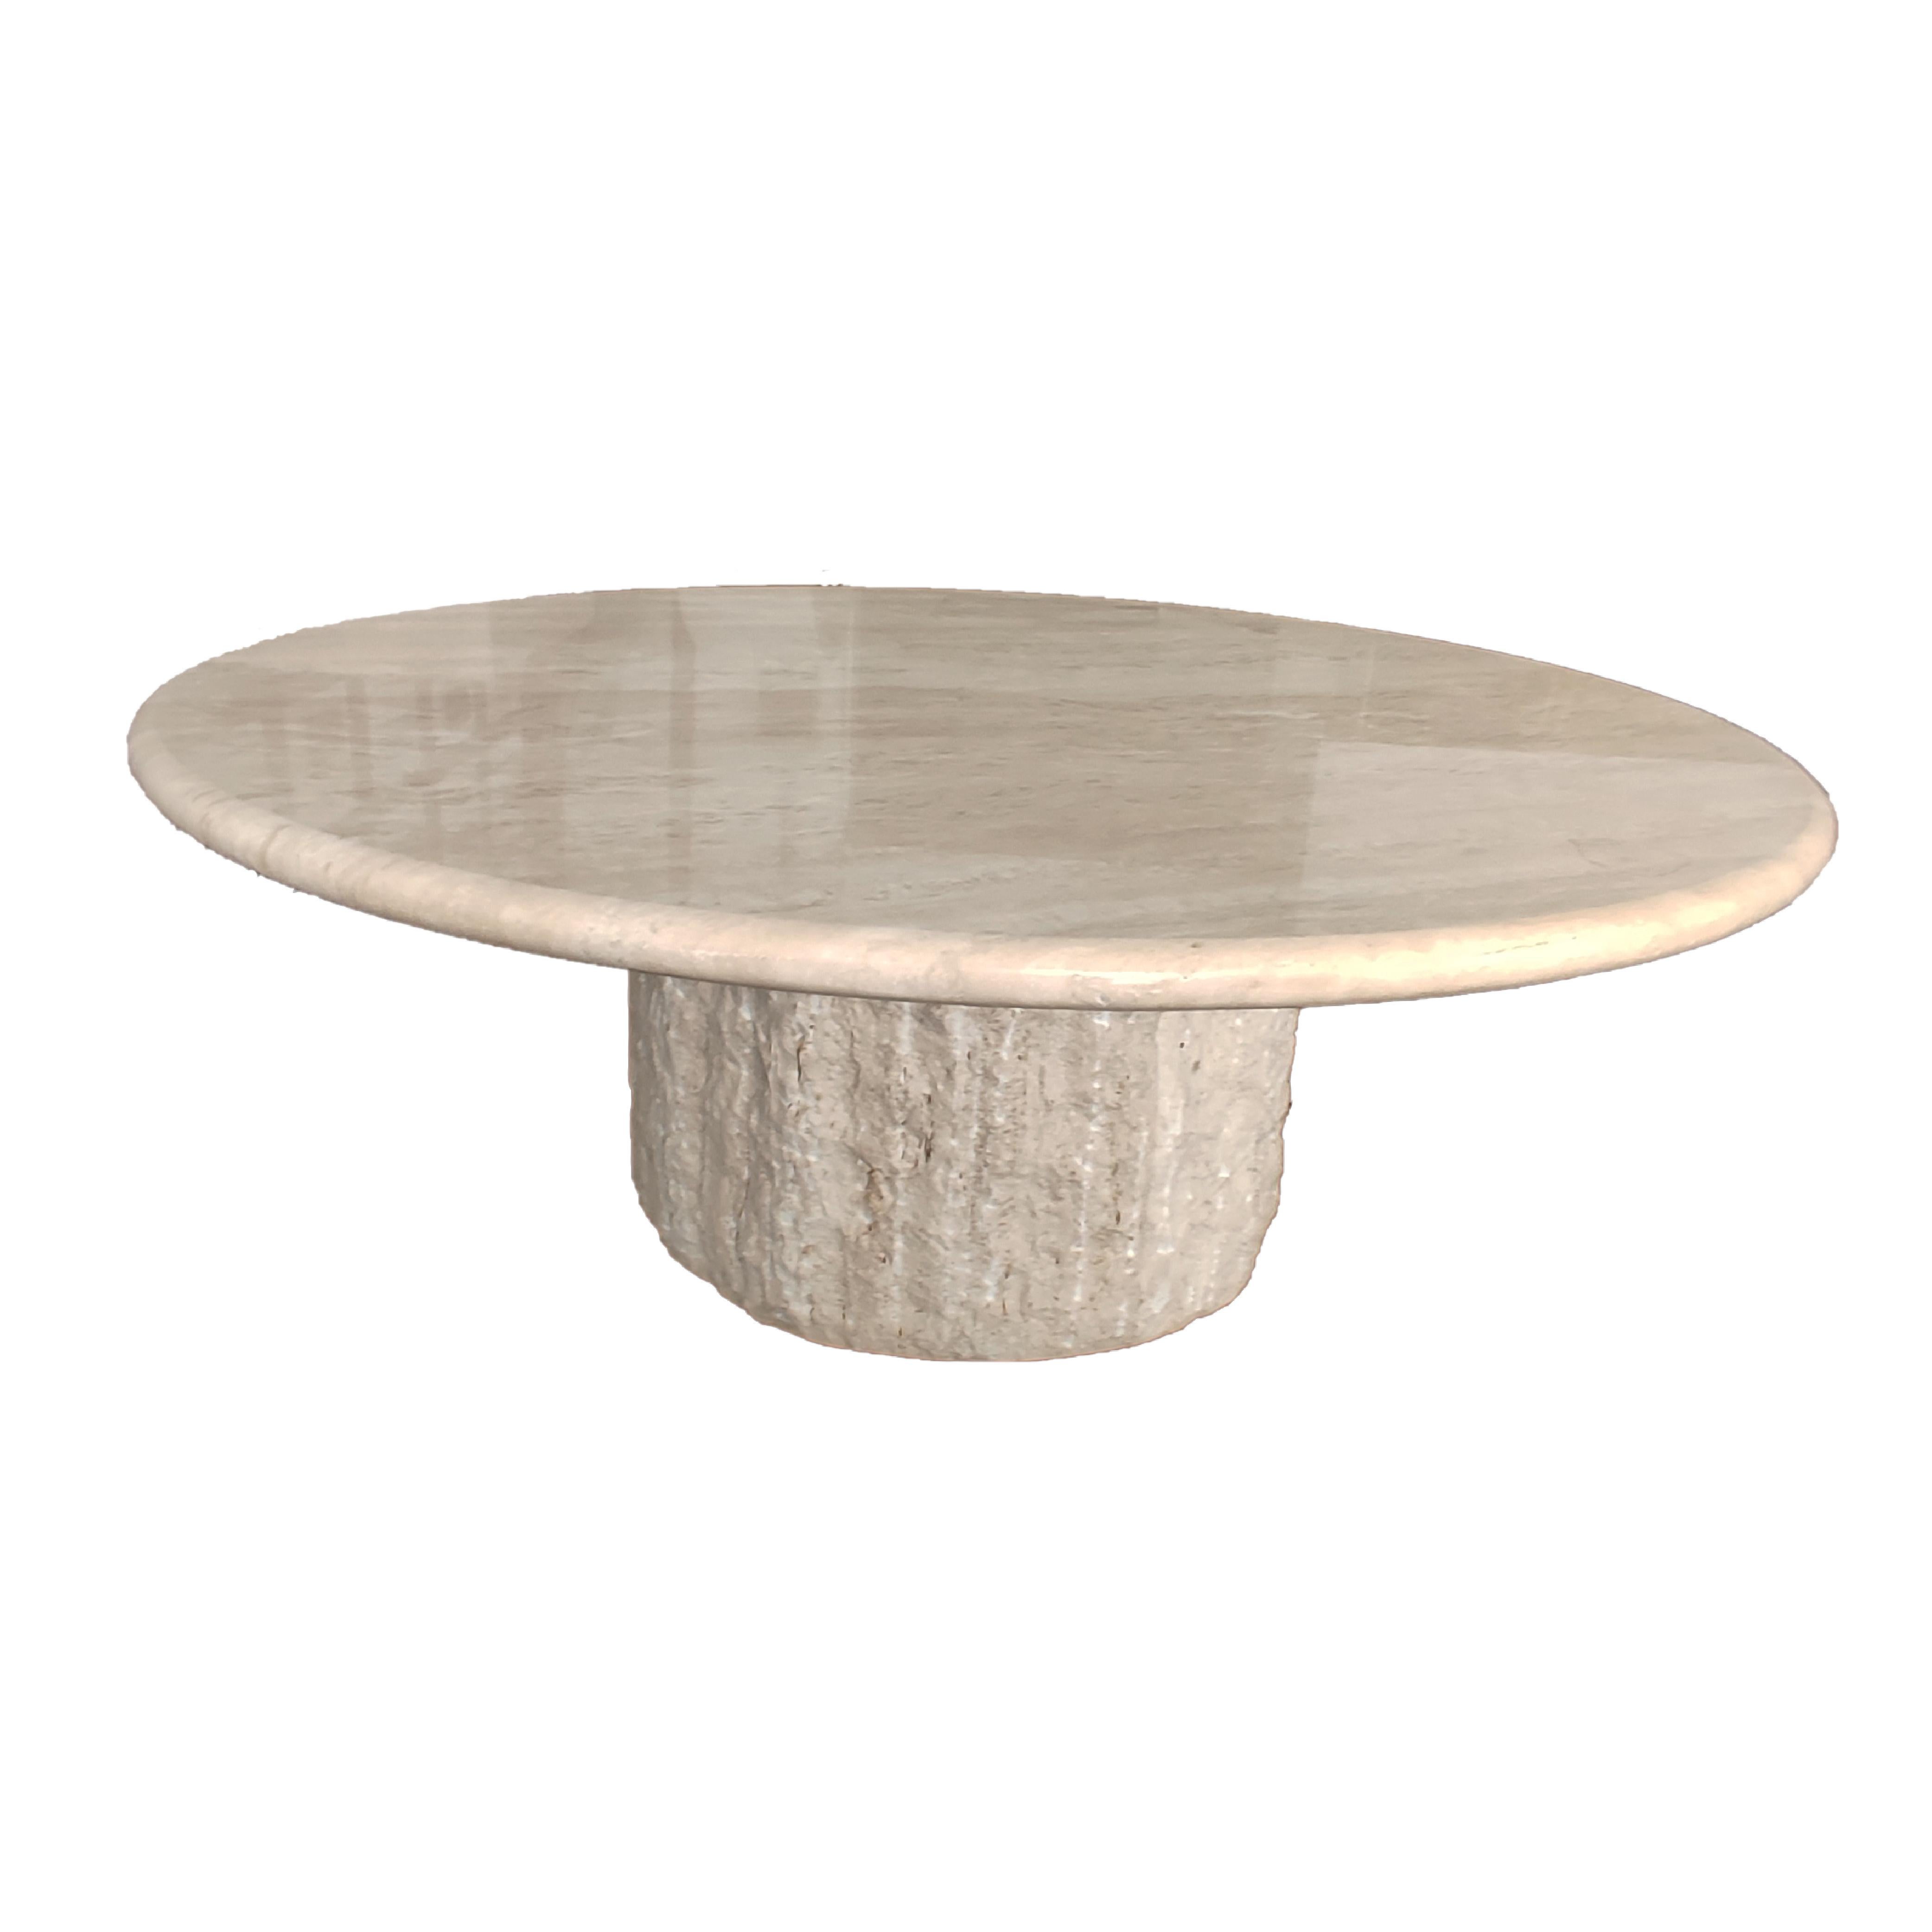 The BALTA coffee table is a coffee table in Roman travertine marble, with round top in polished finish and rounded blunt edge. The circular base is made of Roman travertine marble with a carved finish, which is made by hand with hammer and